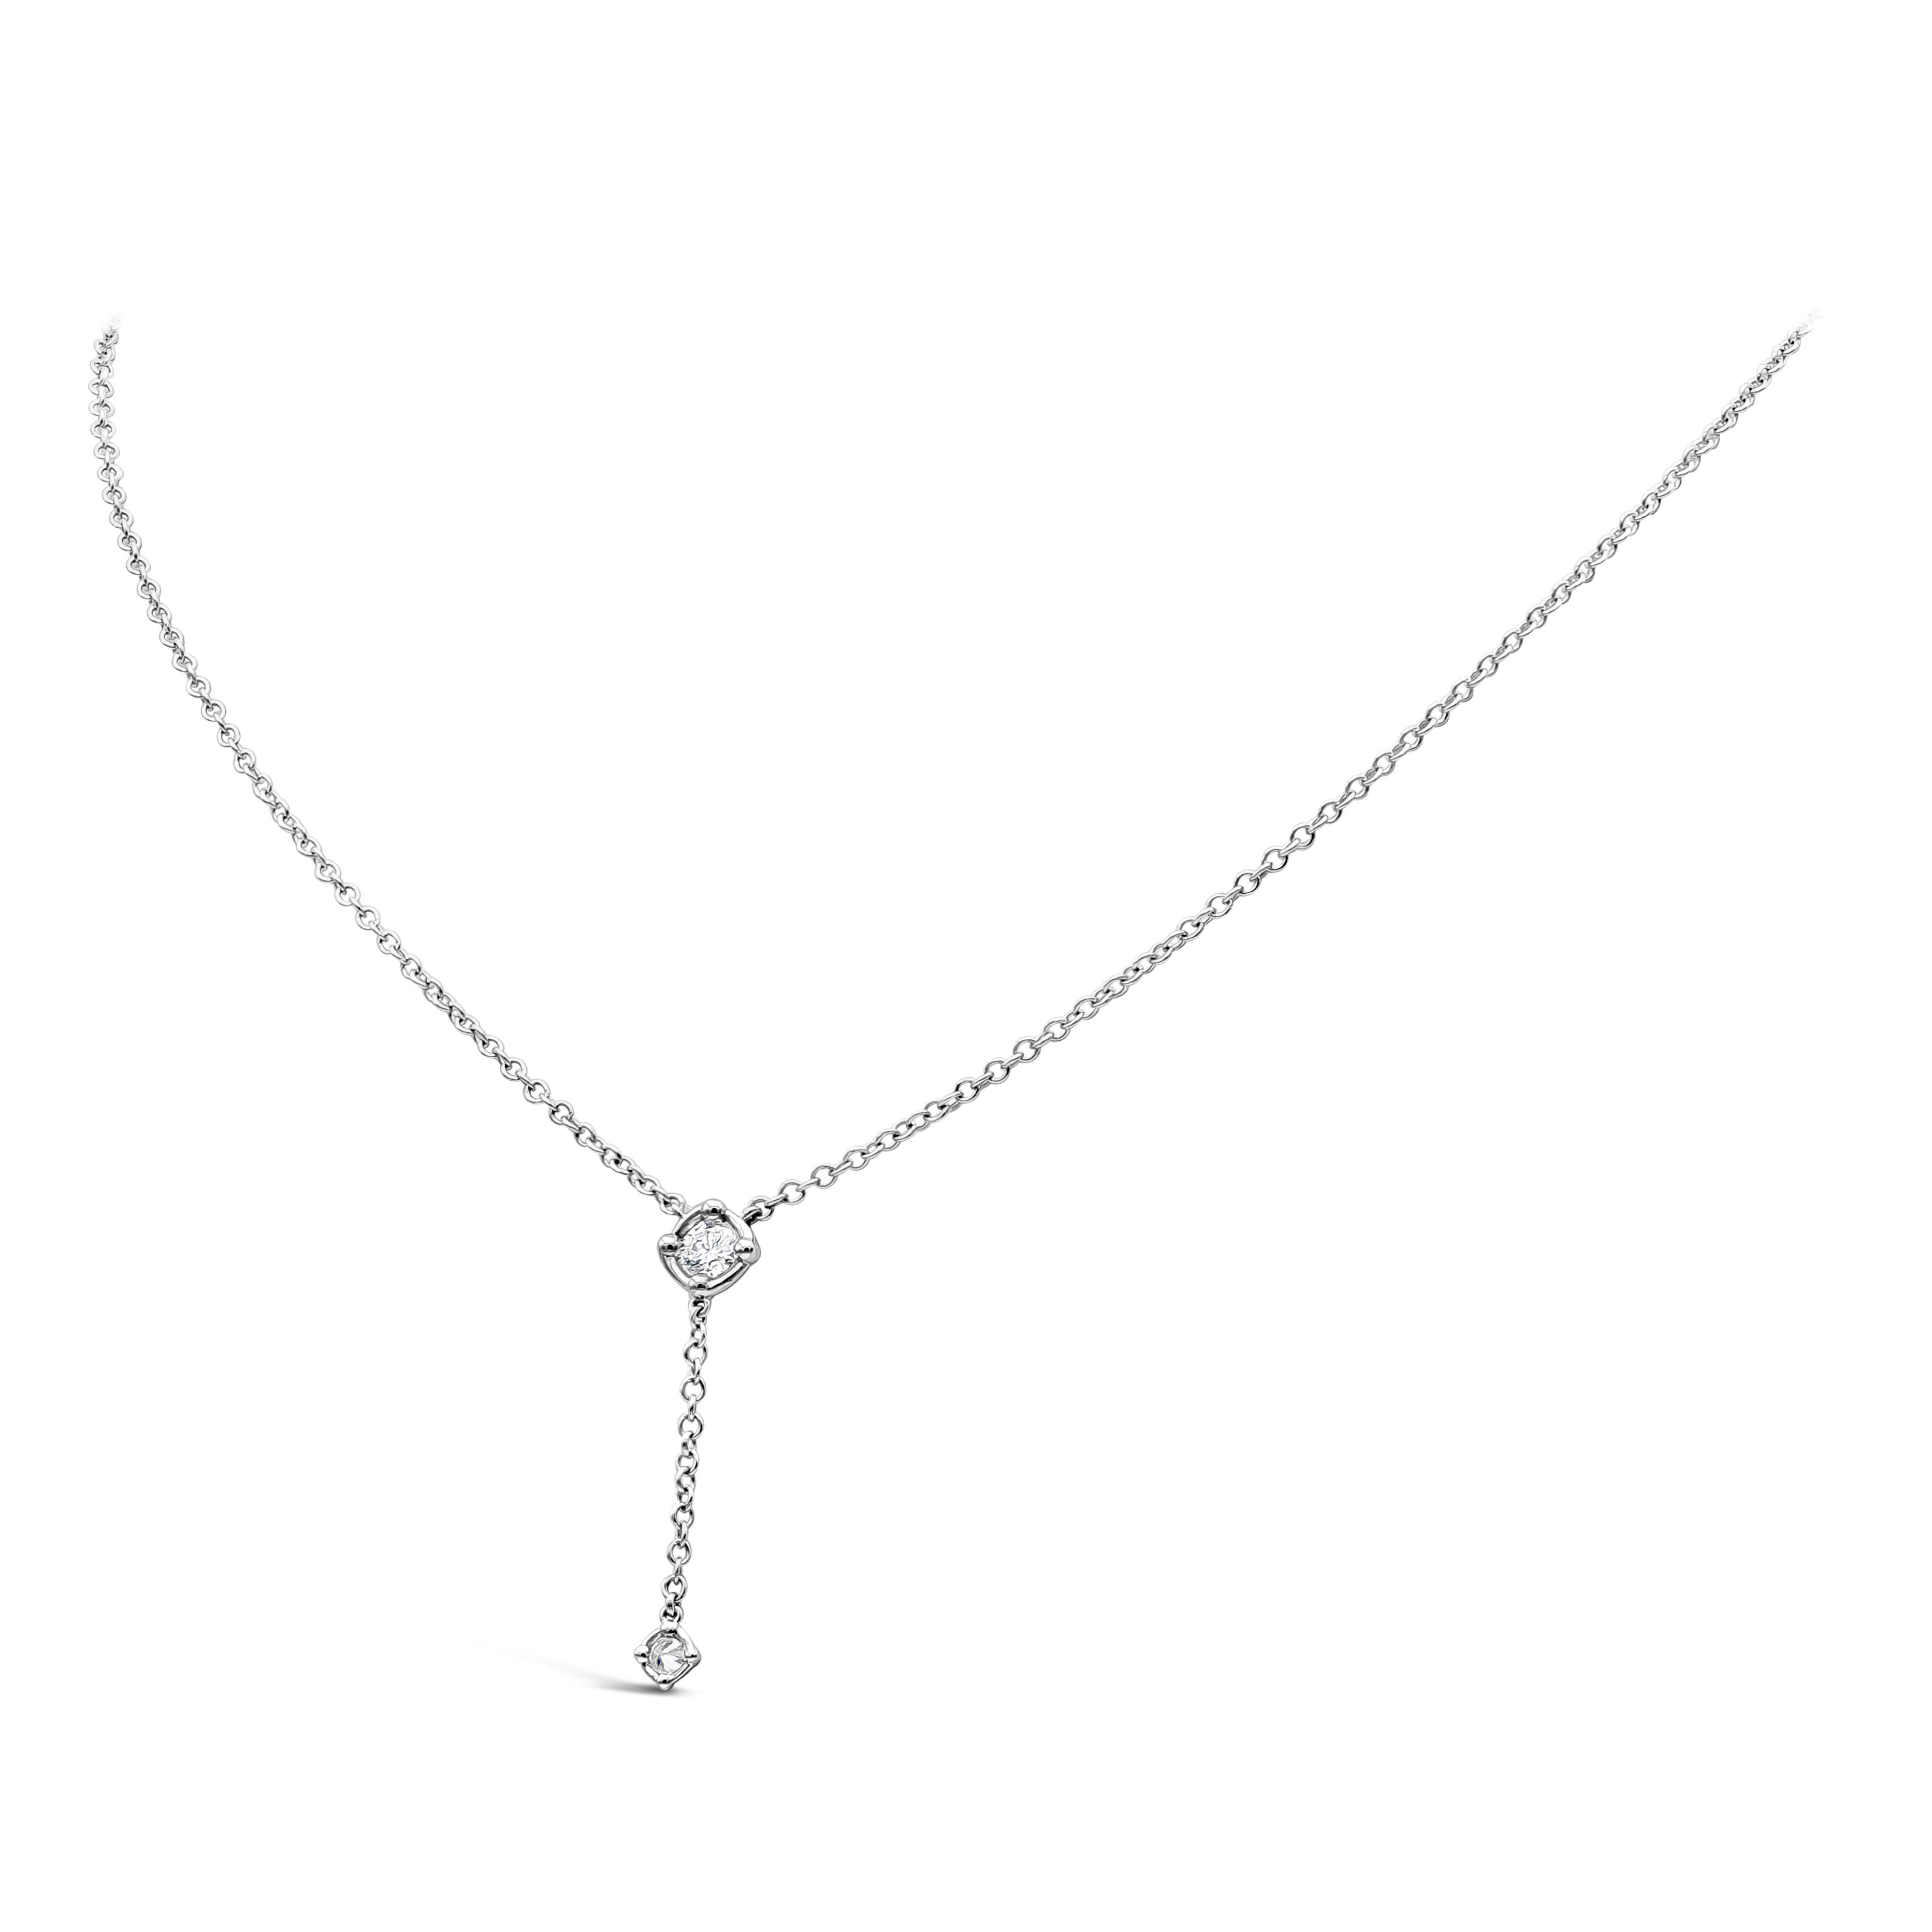 A simple and versatile pendant necklace showcasing a 0.30 carat round diamond in a 18 karat white gold bezel. Attached to a 16 inch with an interval at 15 inch white gold chain.

Roman Malakov is a custom house, specializing in creating anything you